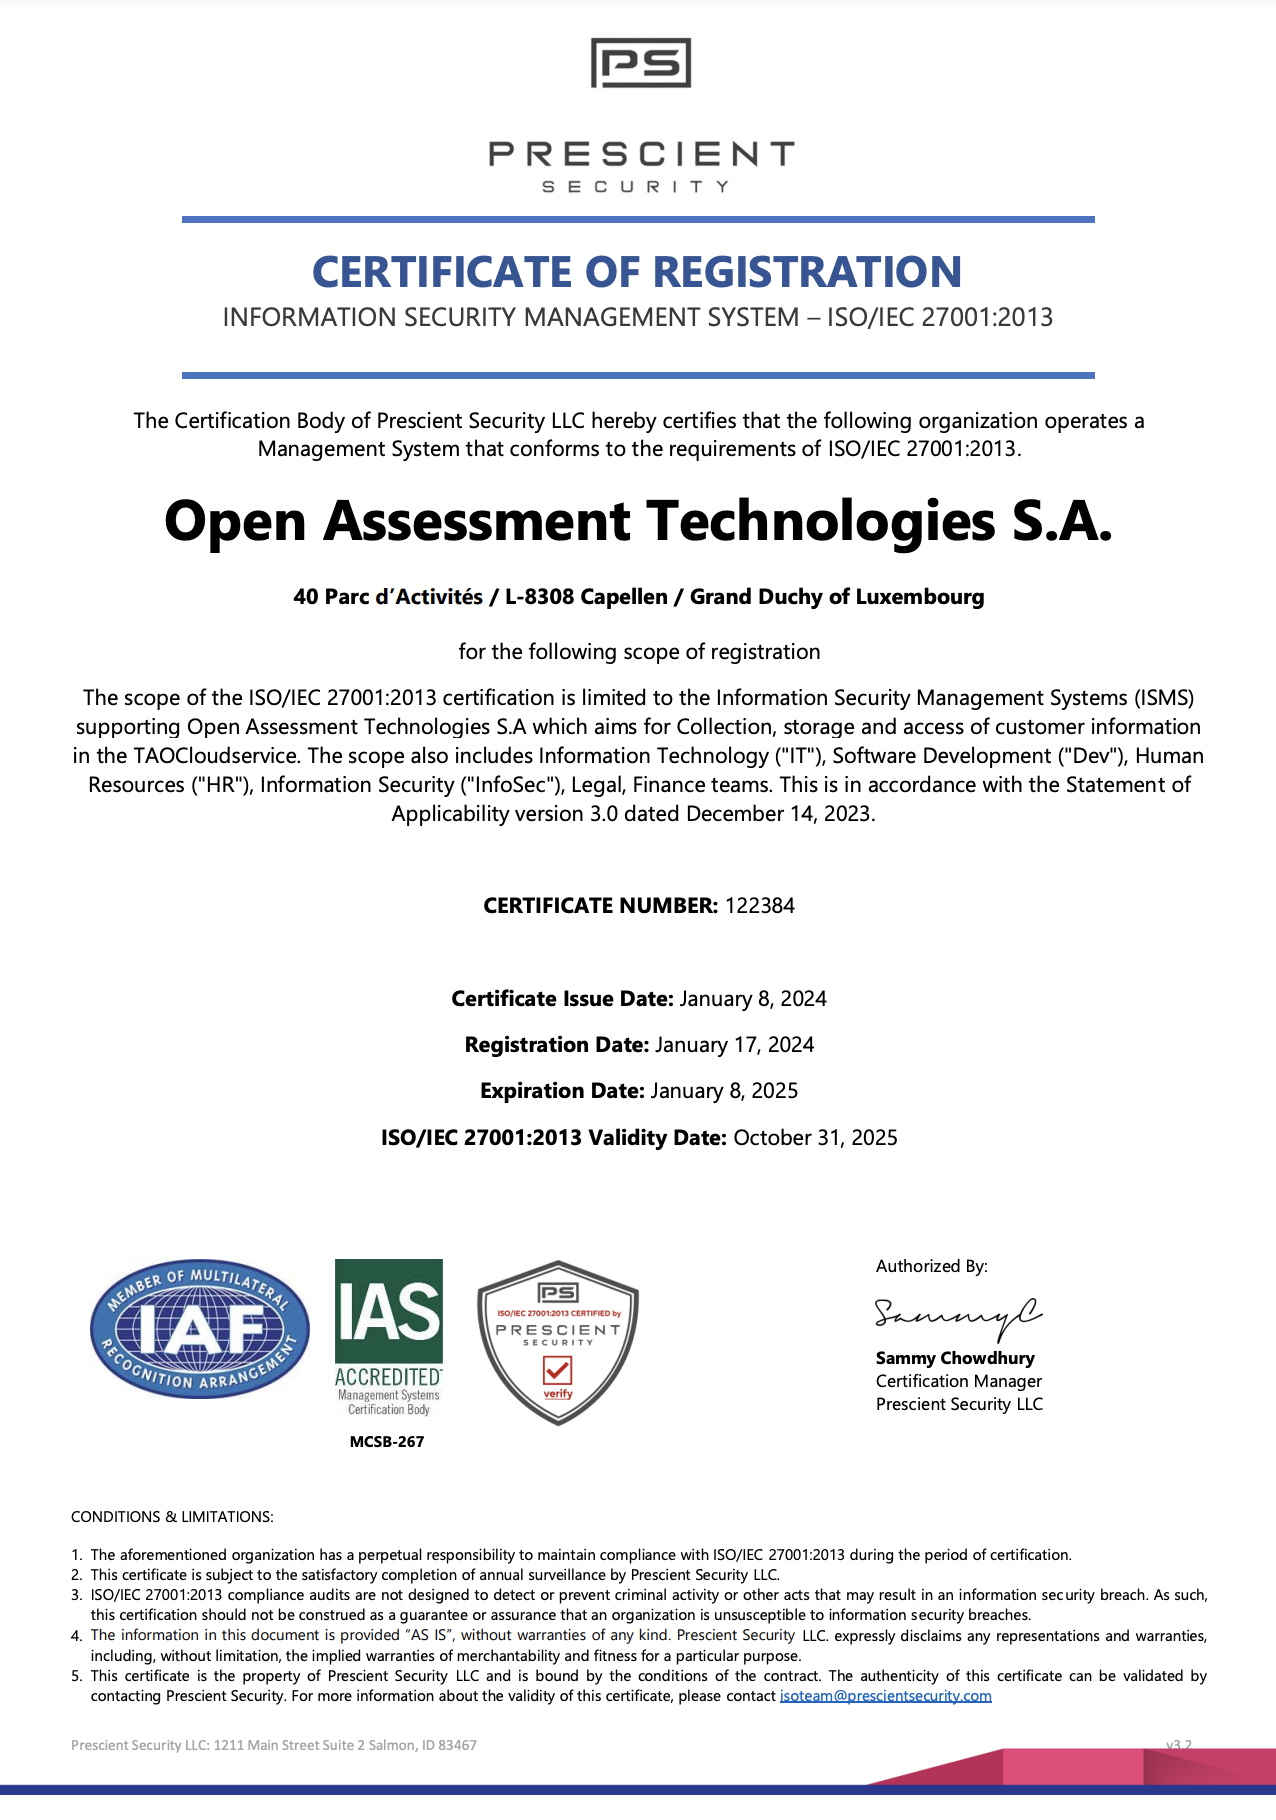 Image of OAT's ISO/IEC 27001 Certification from the Certification body Prescient Security LLC, IAS, IAS Accredited.